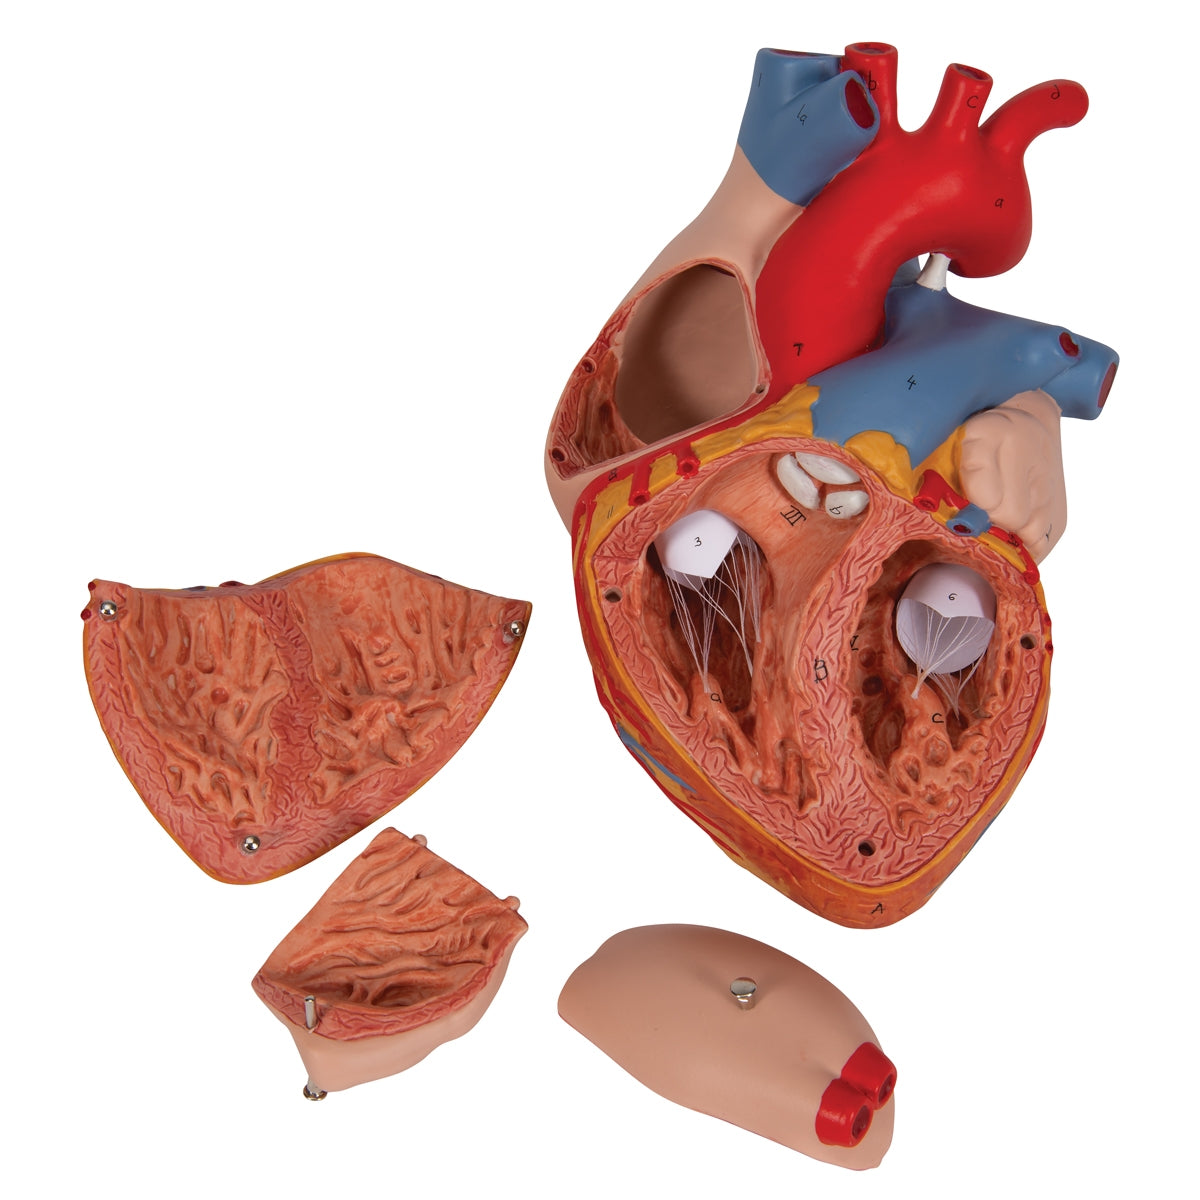 Human Heart Model, 2-times Life-Size, 4 part